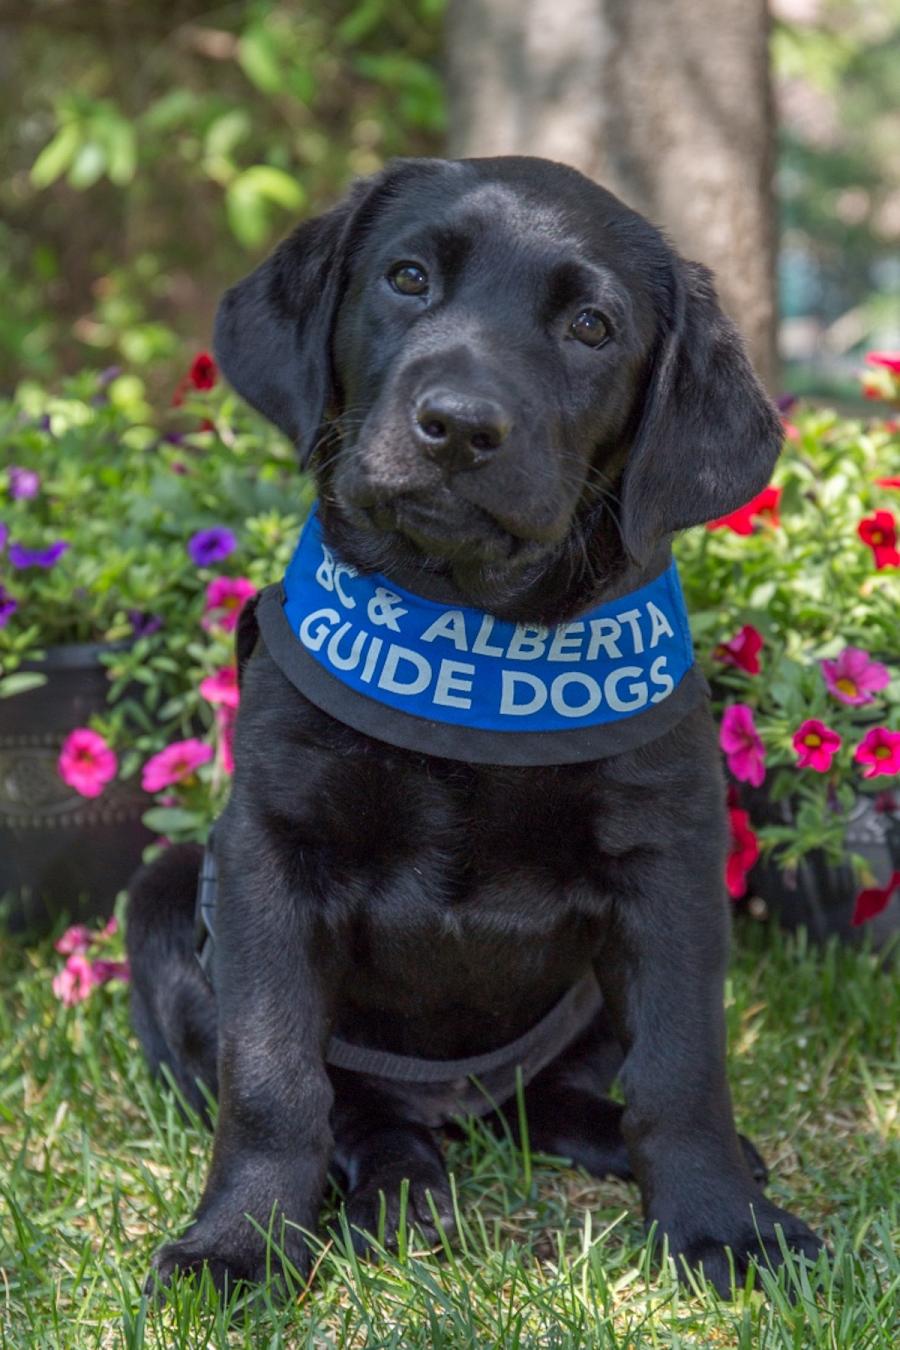 Alberta Guide Dog “Puppy Scholarships” for Schools